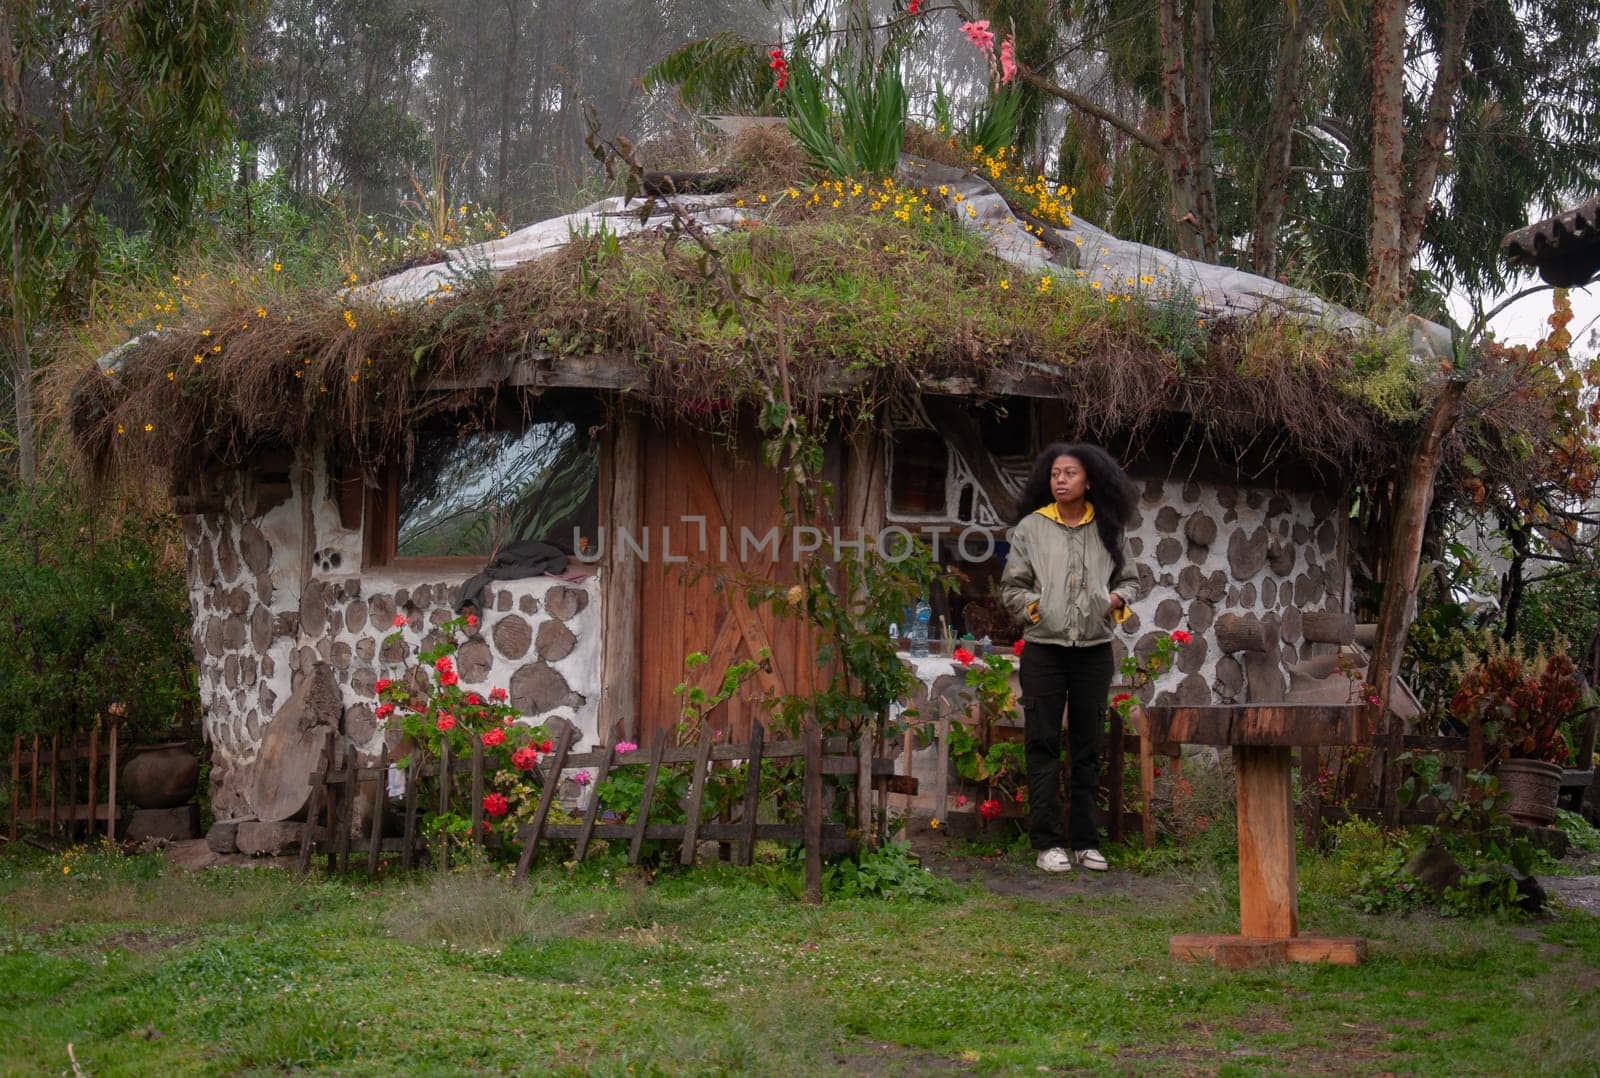 paradisiacal rural tourism: african-american woman staying in a cabin in a rural resort where the cabins are round and the roof is adorned with colorful flowers. tourism day. High quality photo